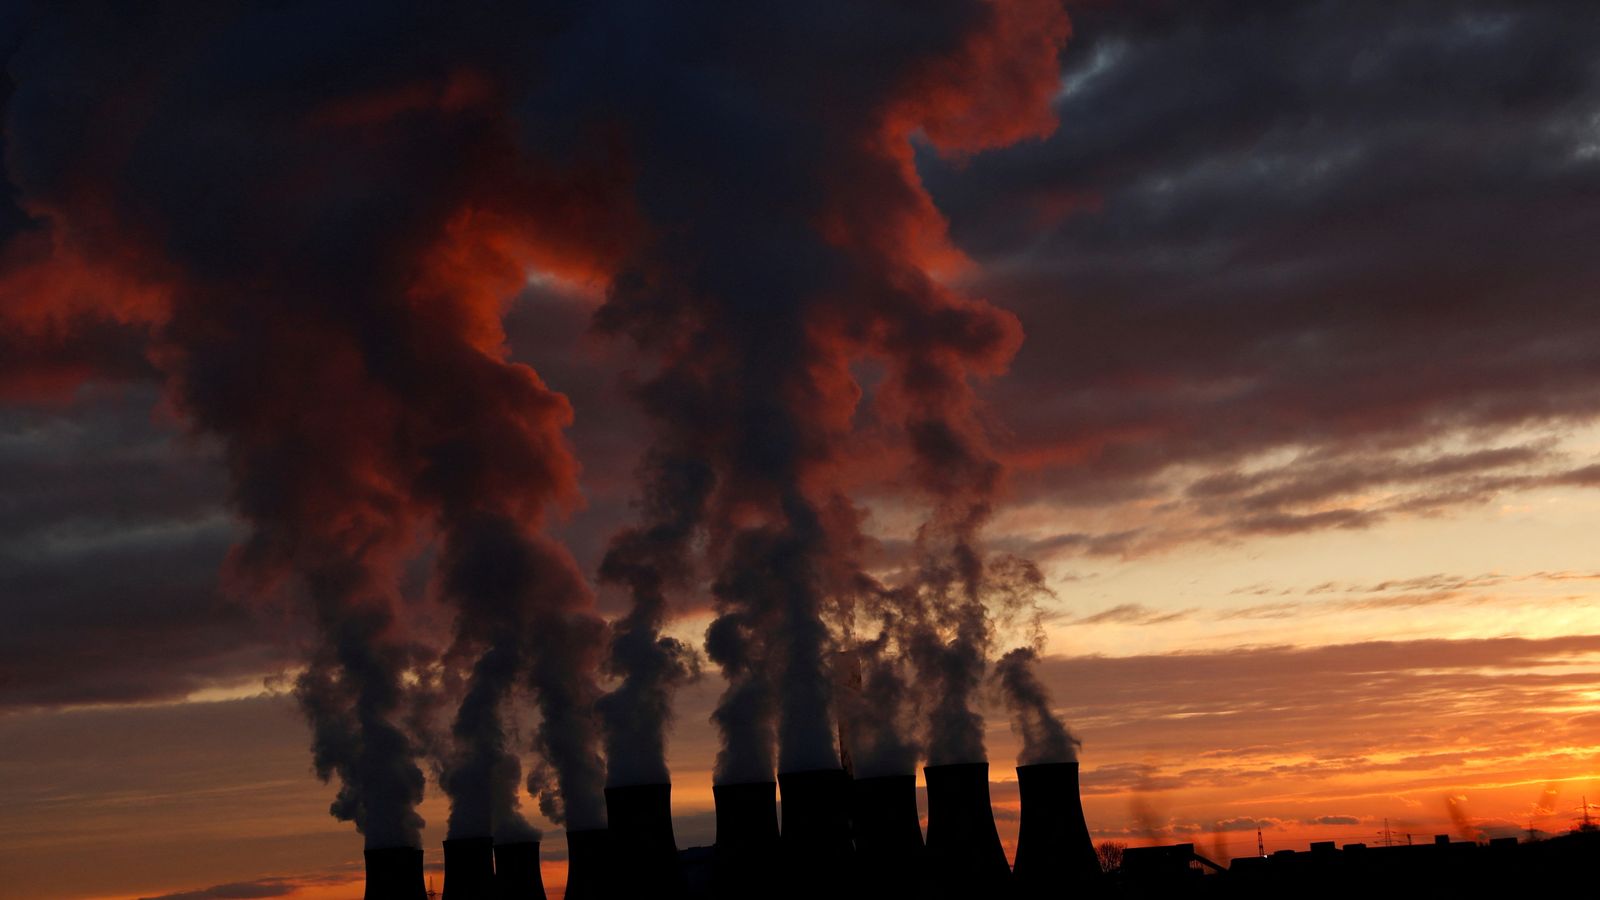 Coal power stations unlikely to provide emergency energy top-up next winter